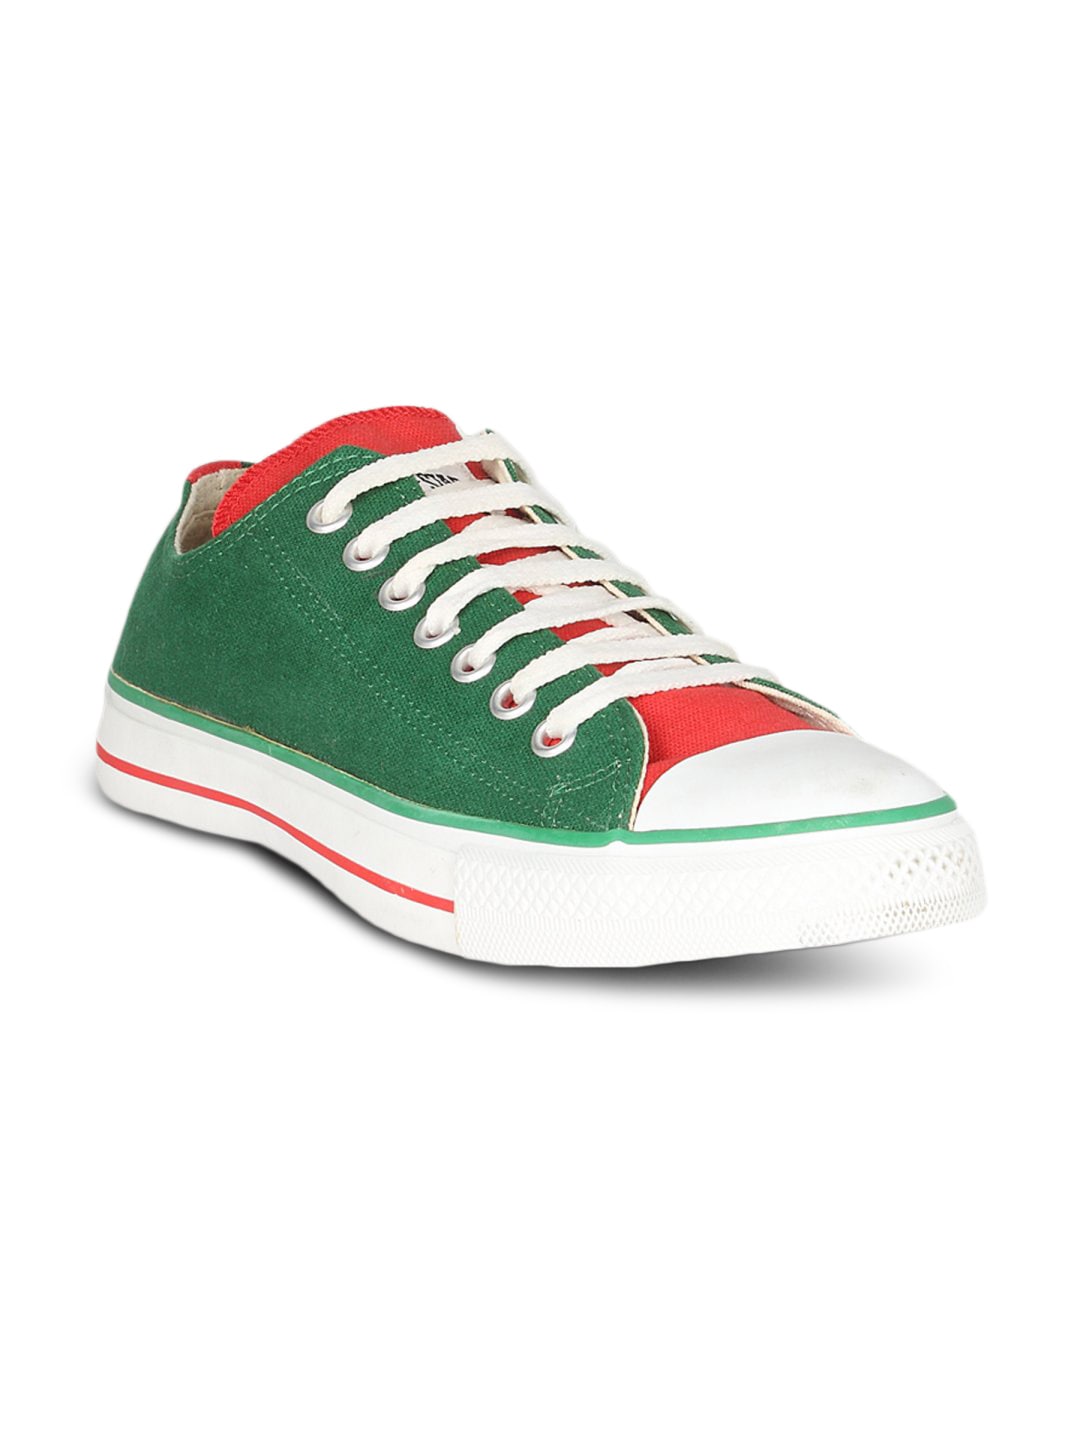 Converse Unisex Tone Ox Green Red Shoe